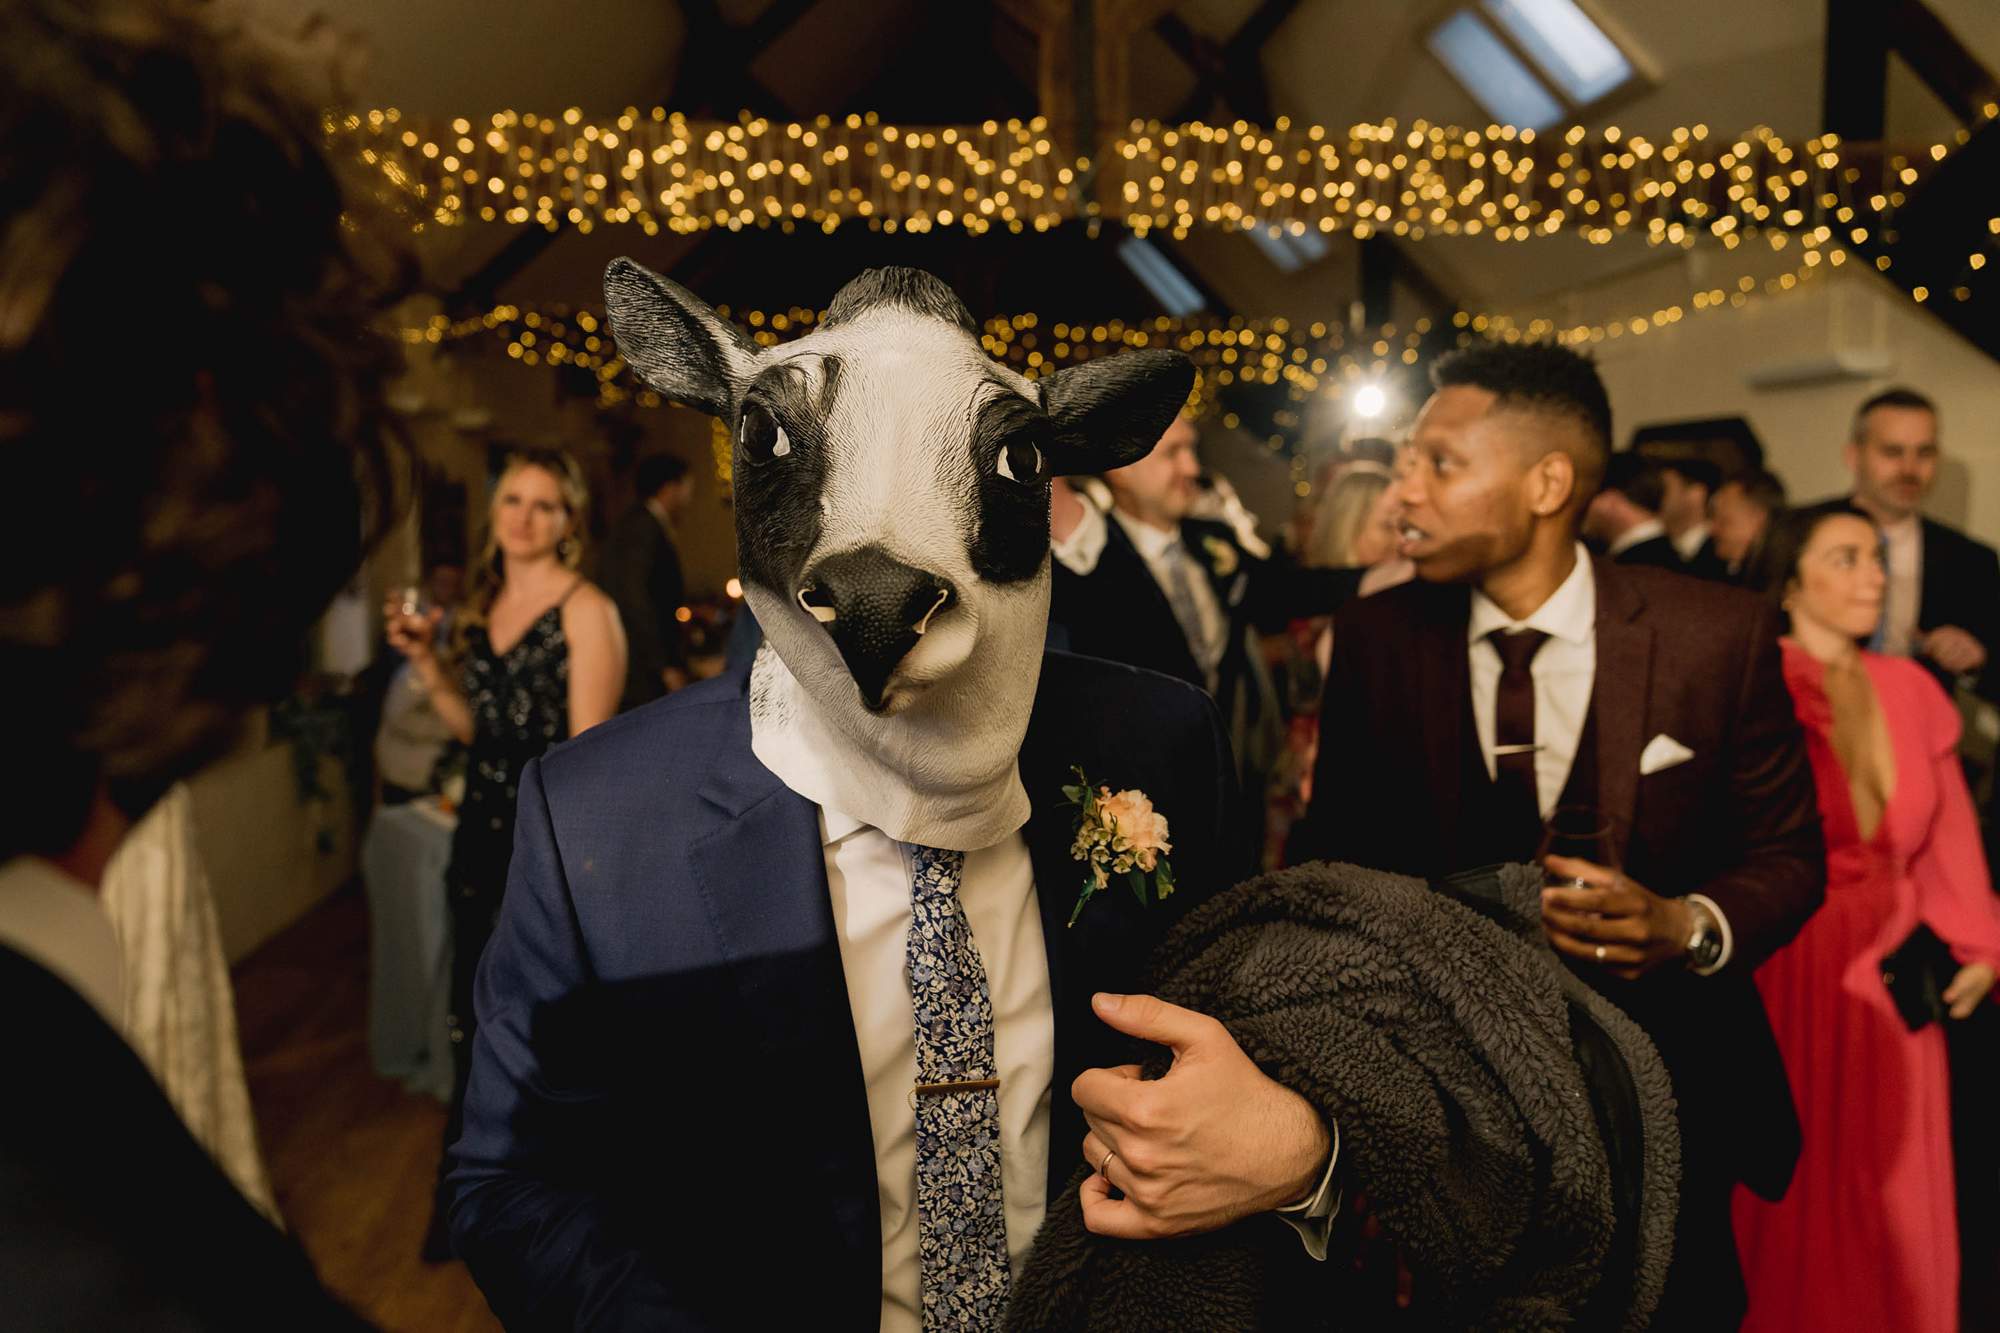 A guest dancing on the dance floor dressed as a cow at a wedding in Surrey.